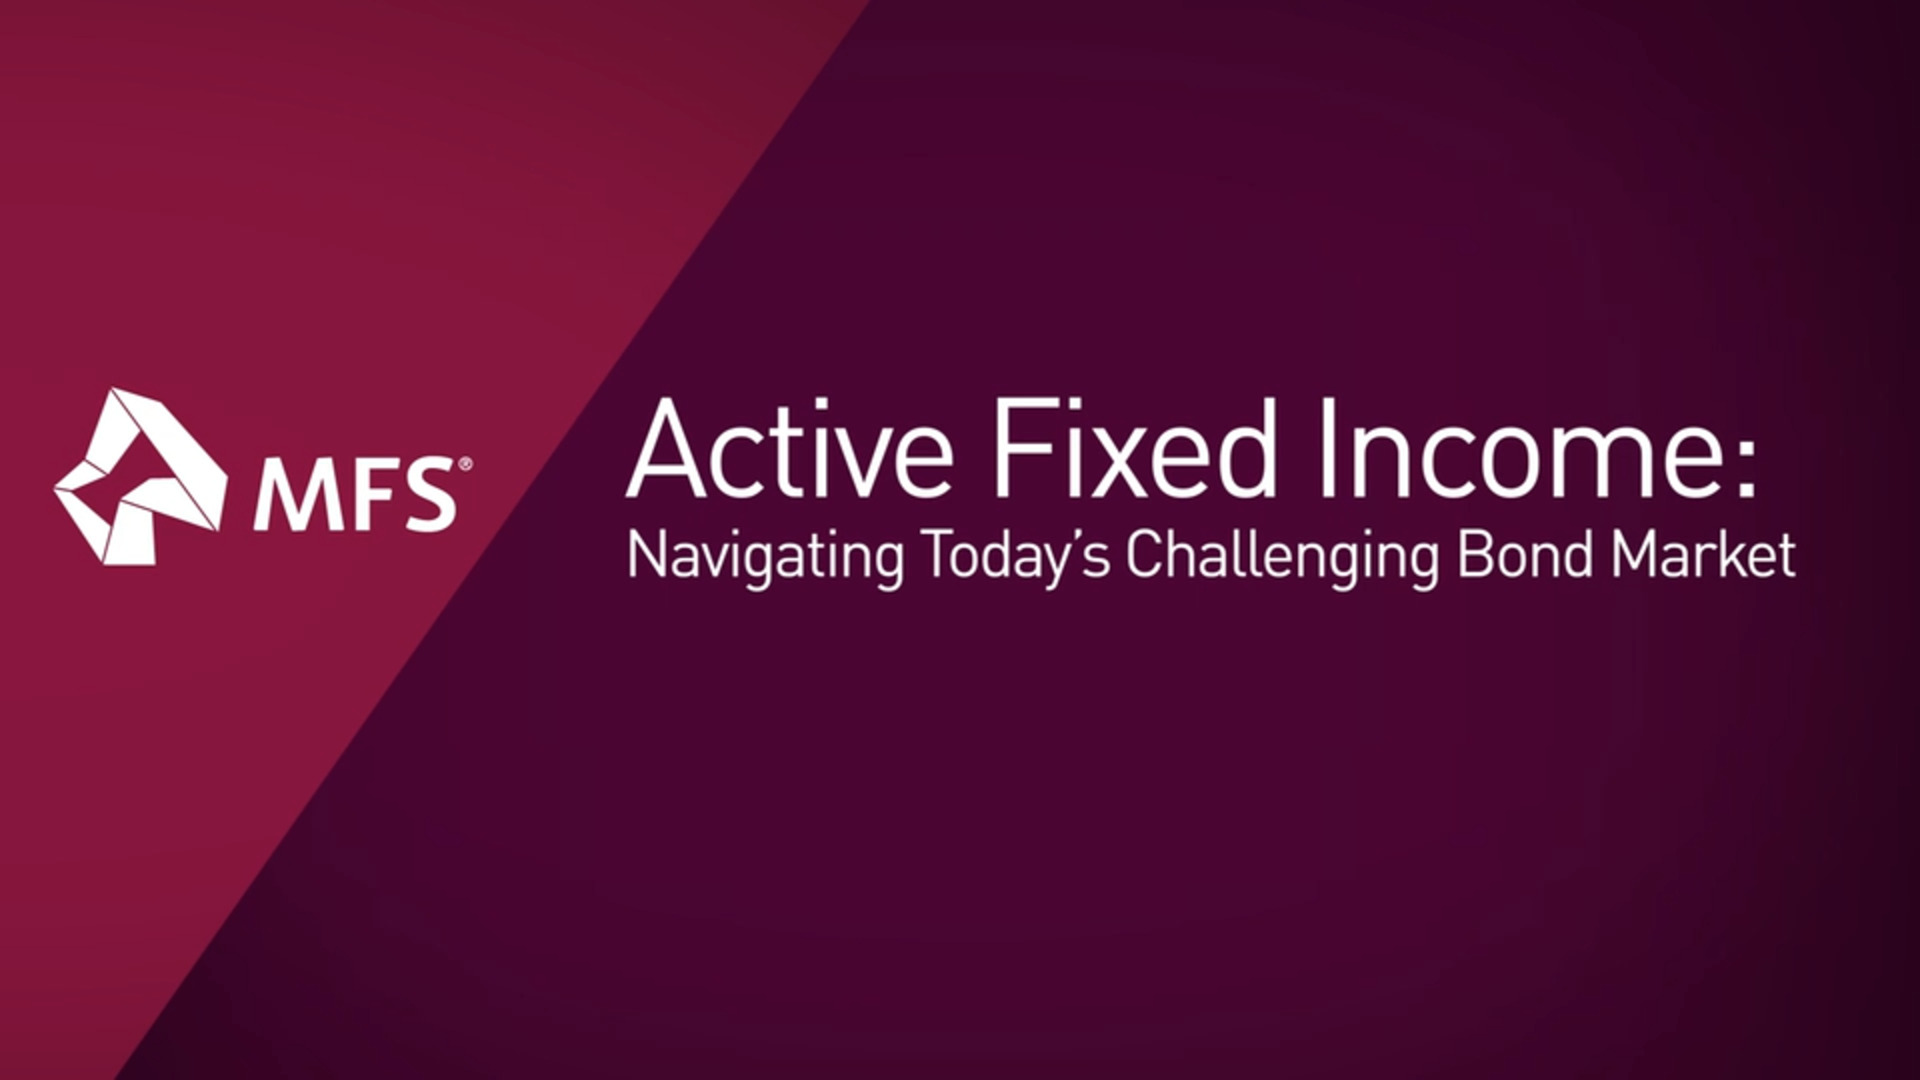 Active Management in Fixed Income: Opportunities, Risks and Investment Approach